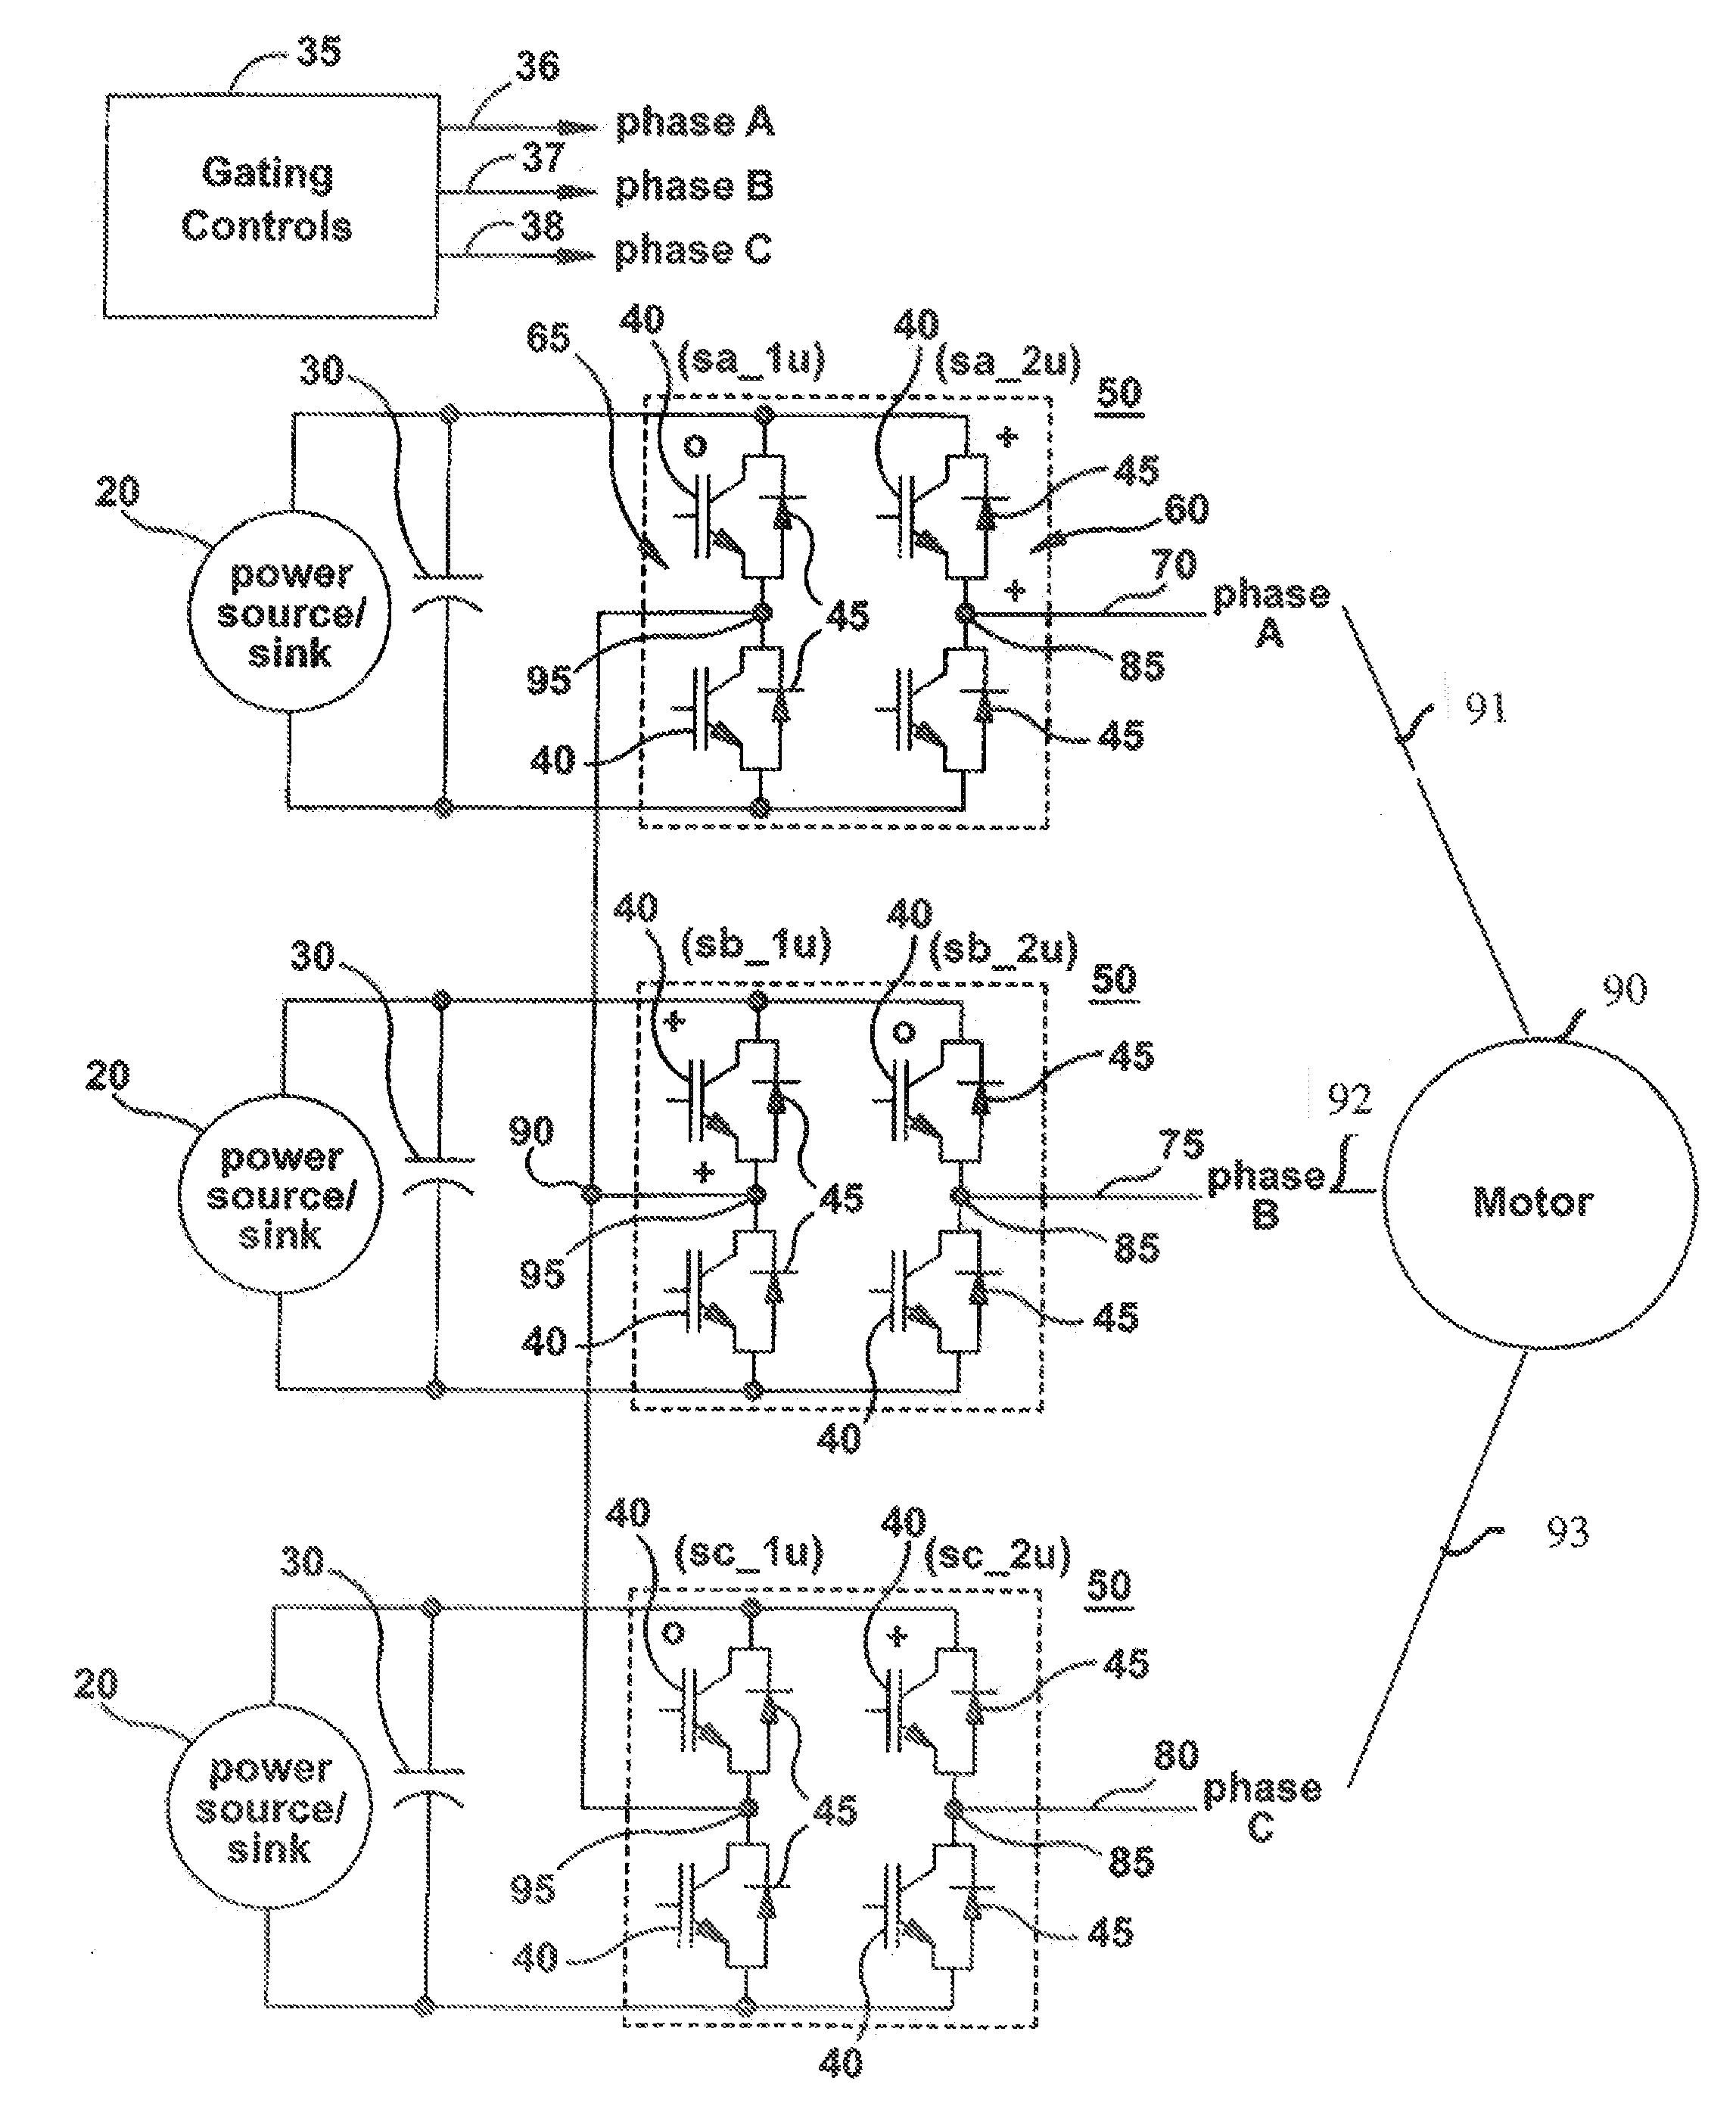 Zero-current notch waveform for control of a three-phase, wye-connected H-bridge converter for powering a high-speed electric motor